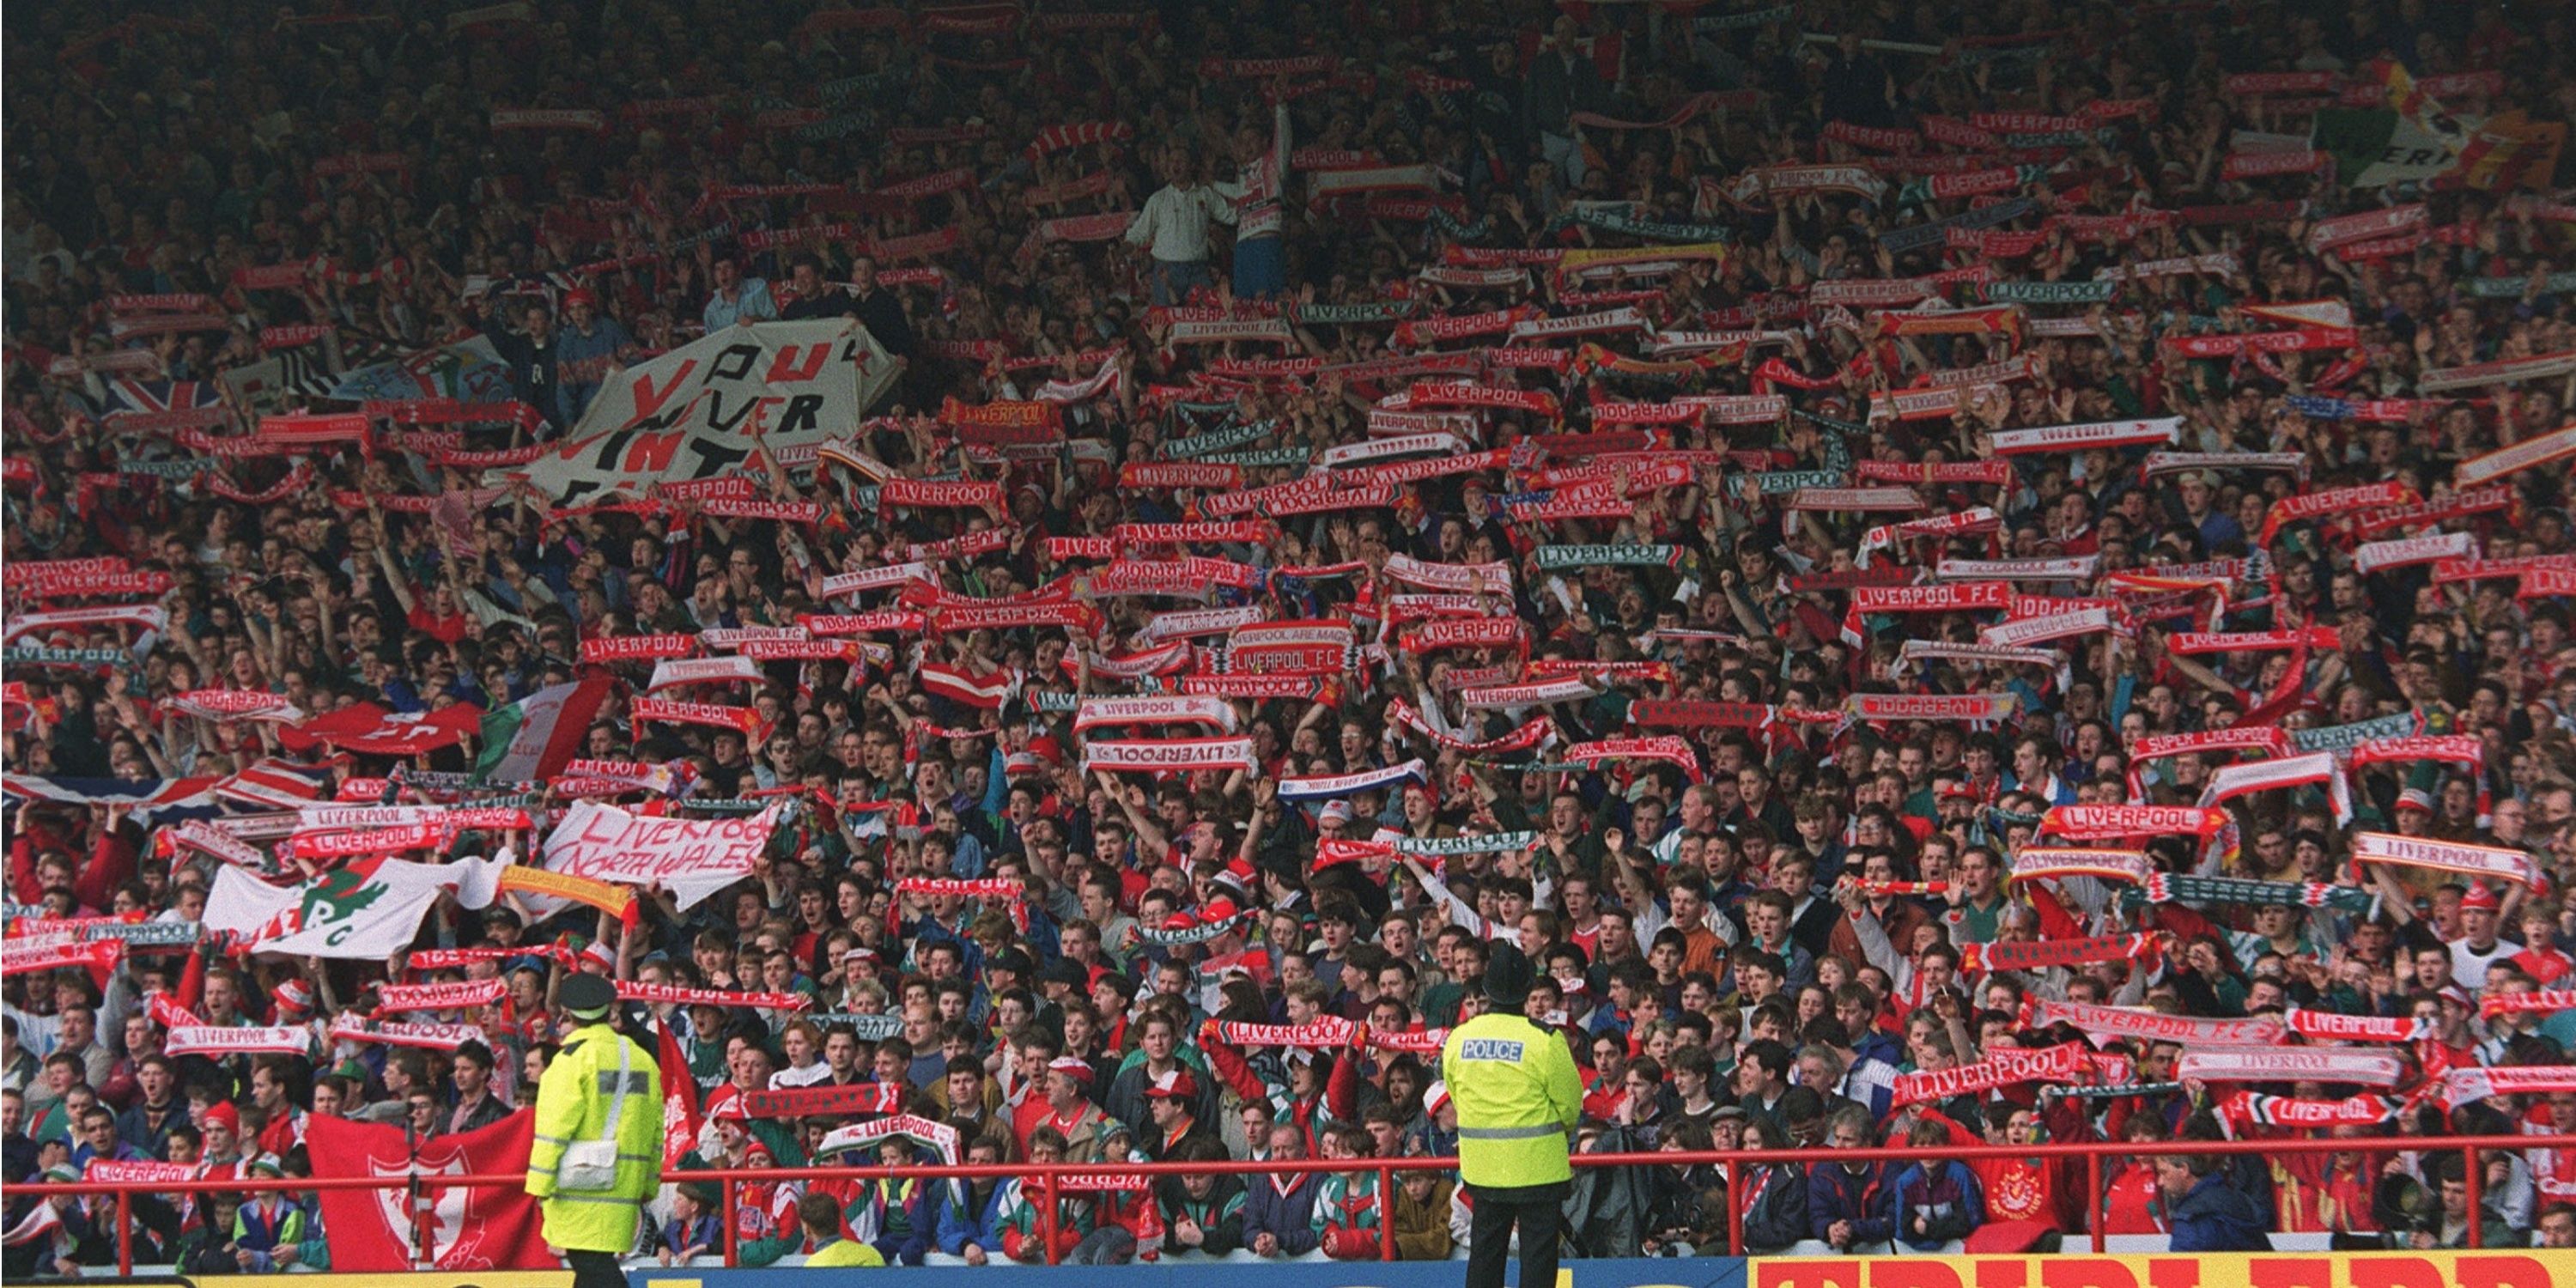 Liverpool supporters in unison on the Kop